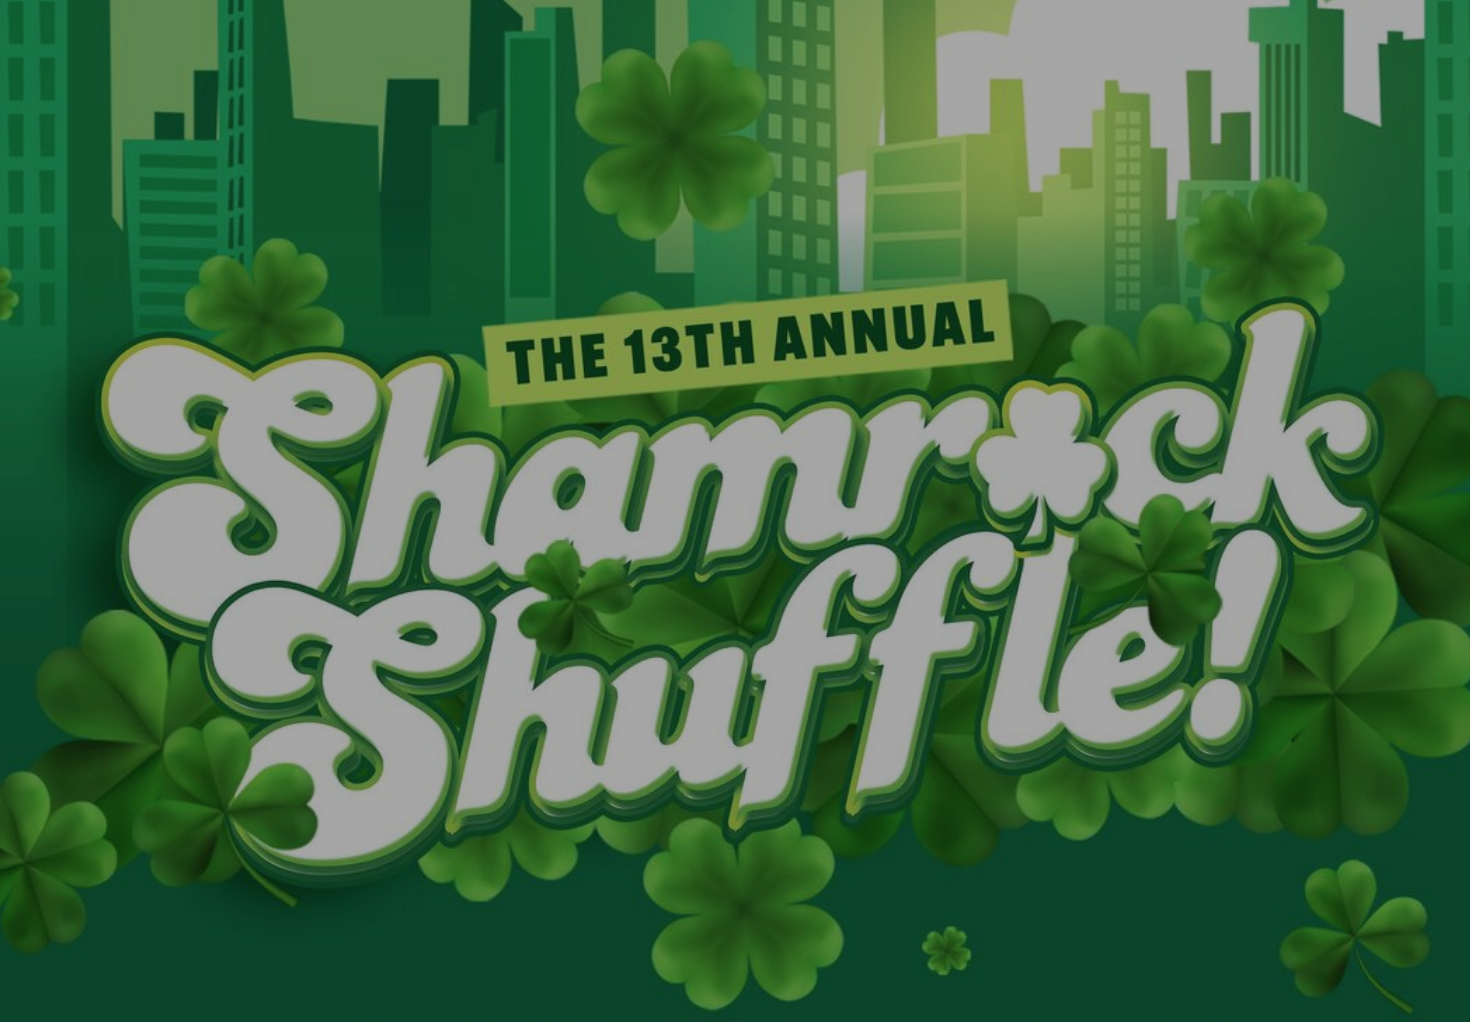 Grab tickets for the Shamrock Shuffle